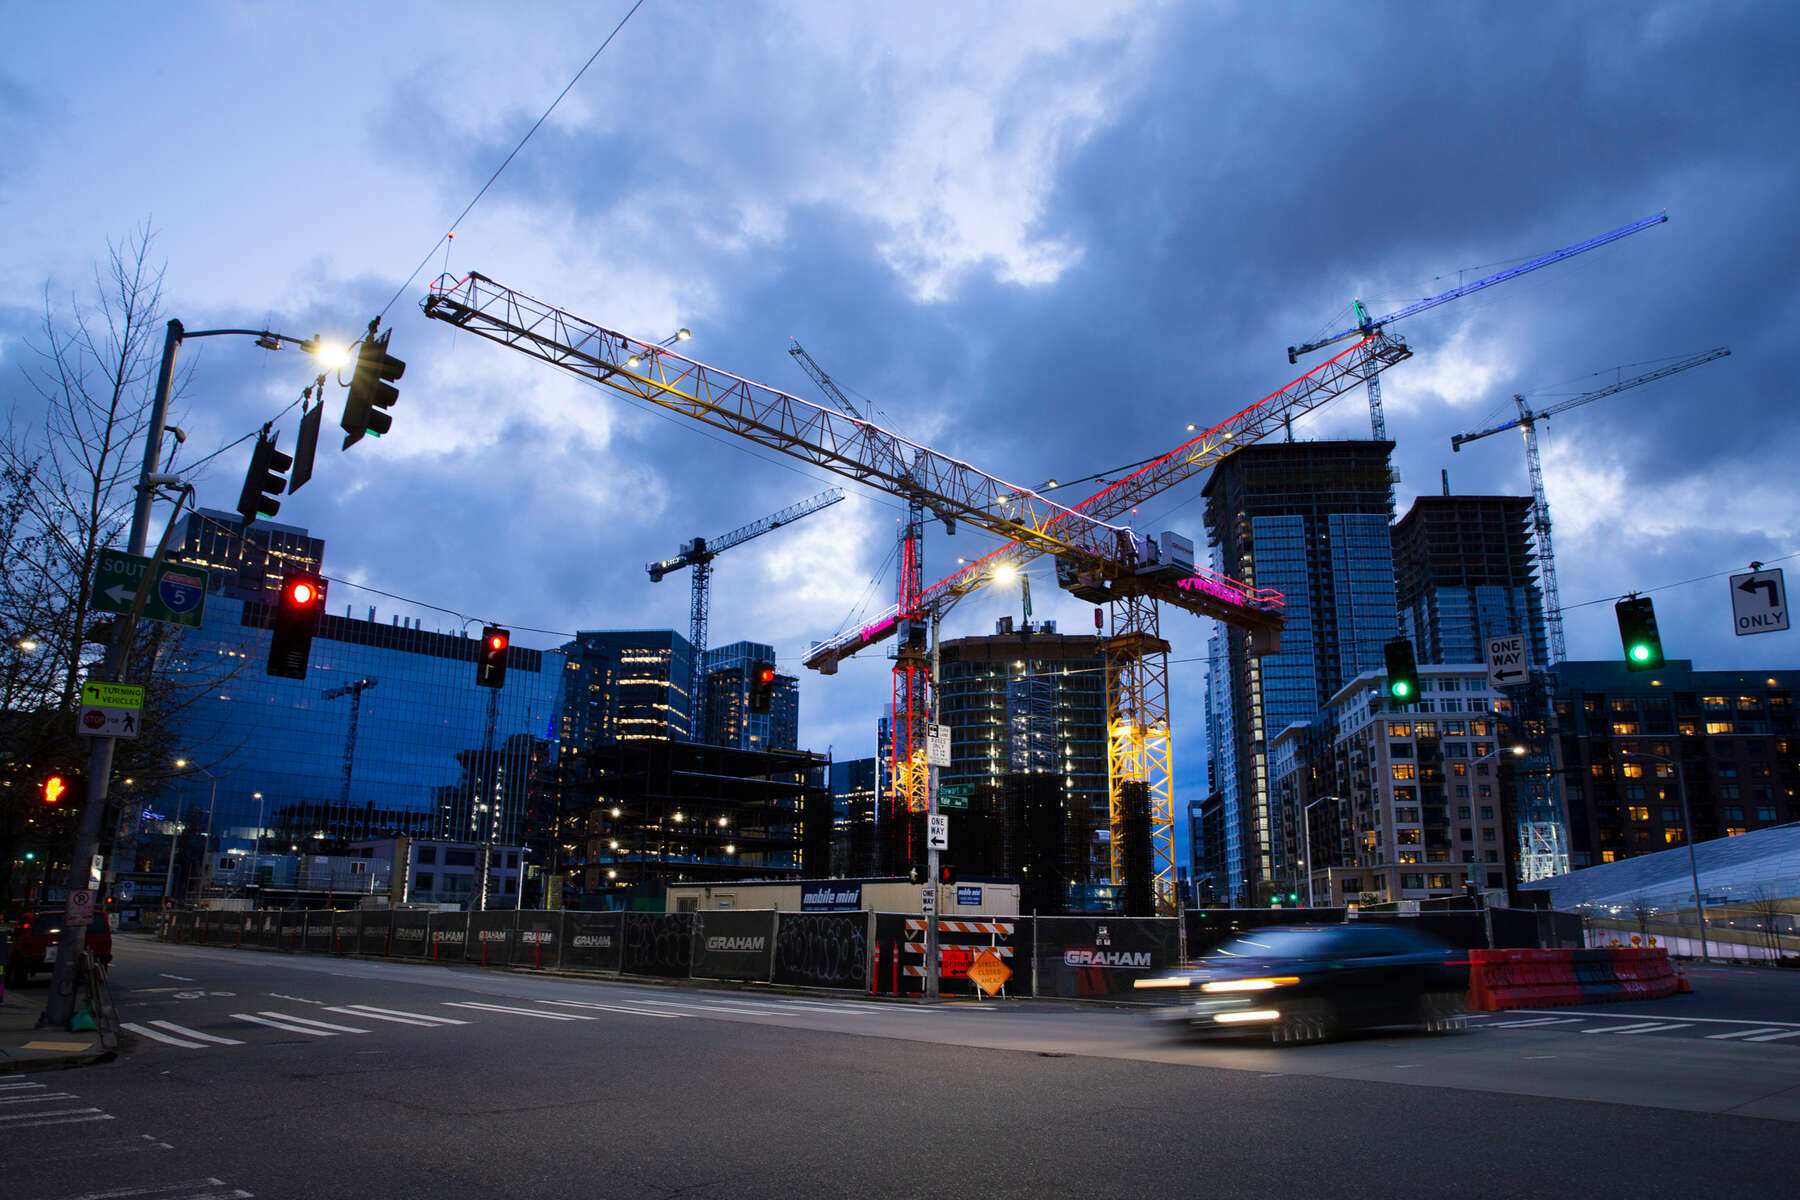 SEATTLE, WA - APRIL 2: Tower cranes crisscross the sky on April 2, 2020 in Seattle, Washington. Most commercial and residential construction sites are considered a nonessential activity and operations have stopped under the state’s new stay-at-home order in an effort to slow the spread of coronavirus (COVID-19). (Photo by Karen Ducey/Getty Images)